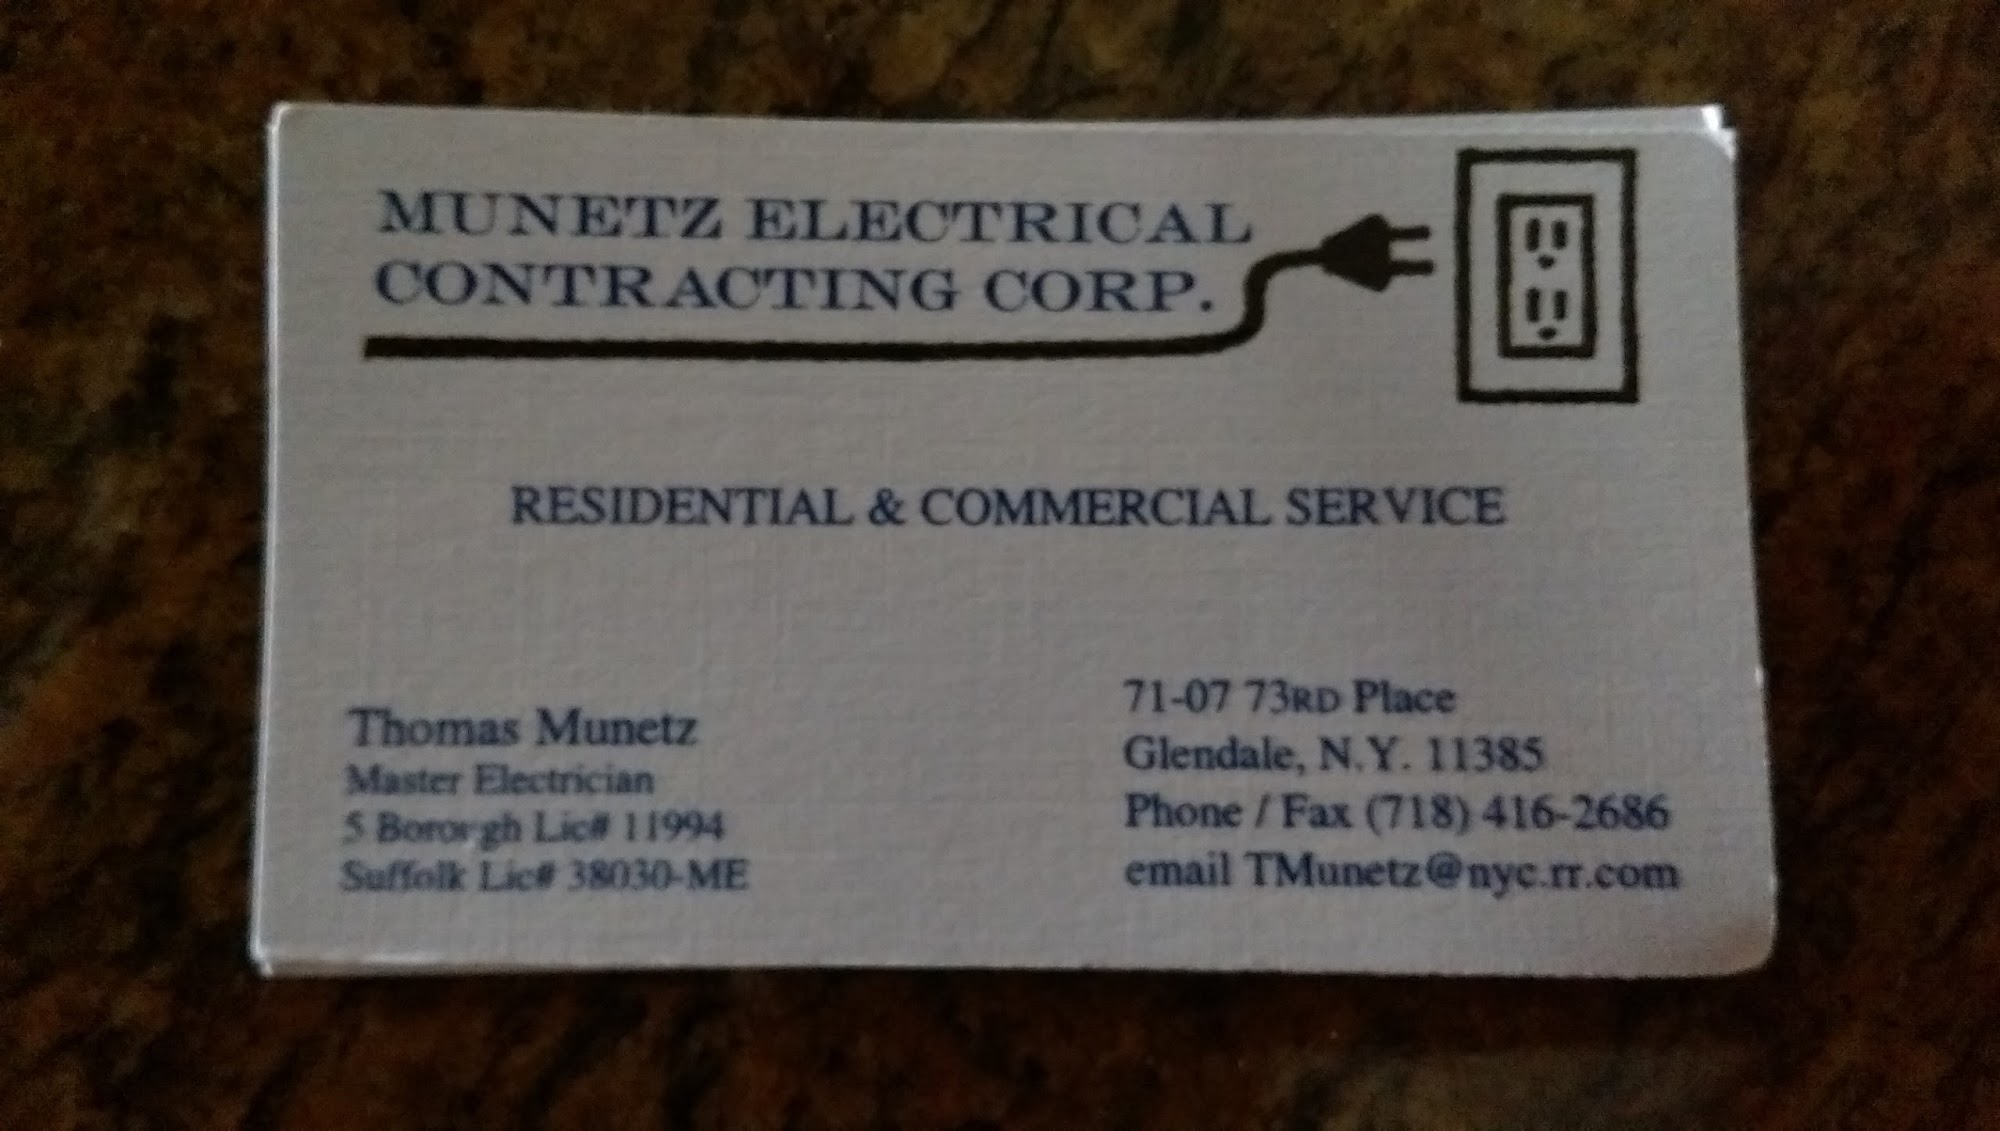 Munetz Electrical Contracting Corporation 71-07 73rd Pl, Glendale New York 11385